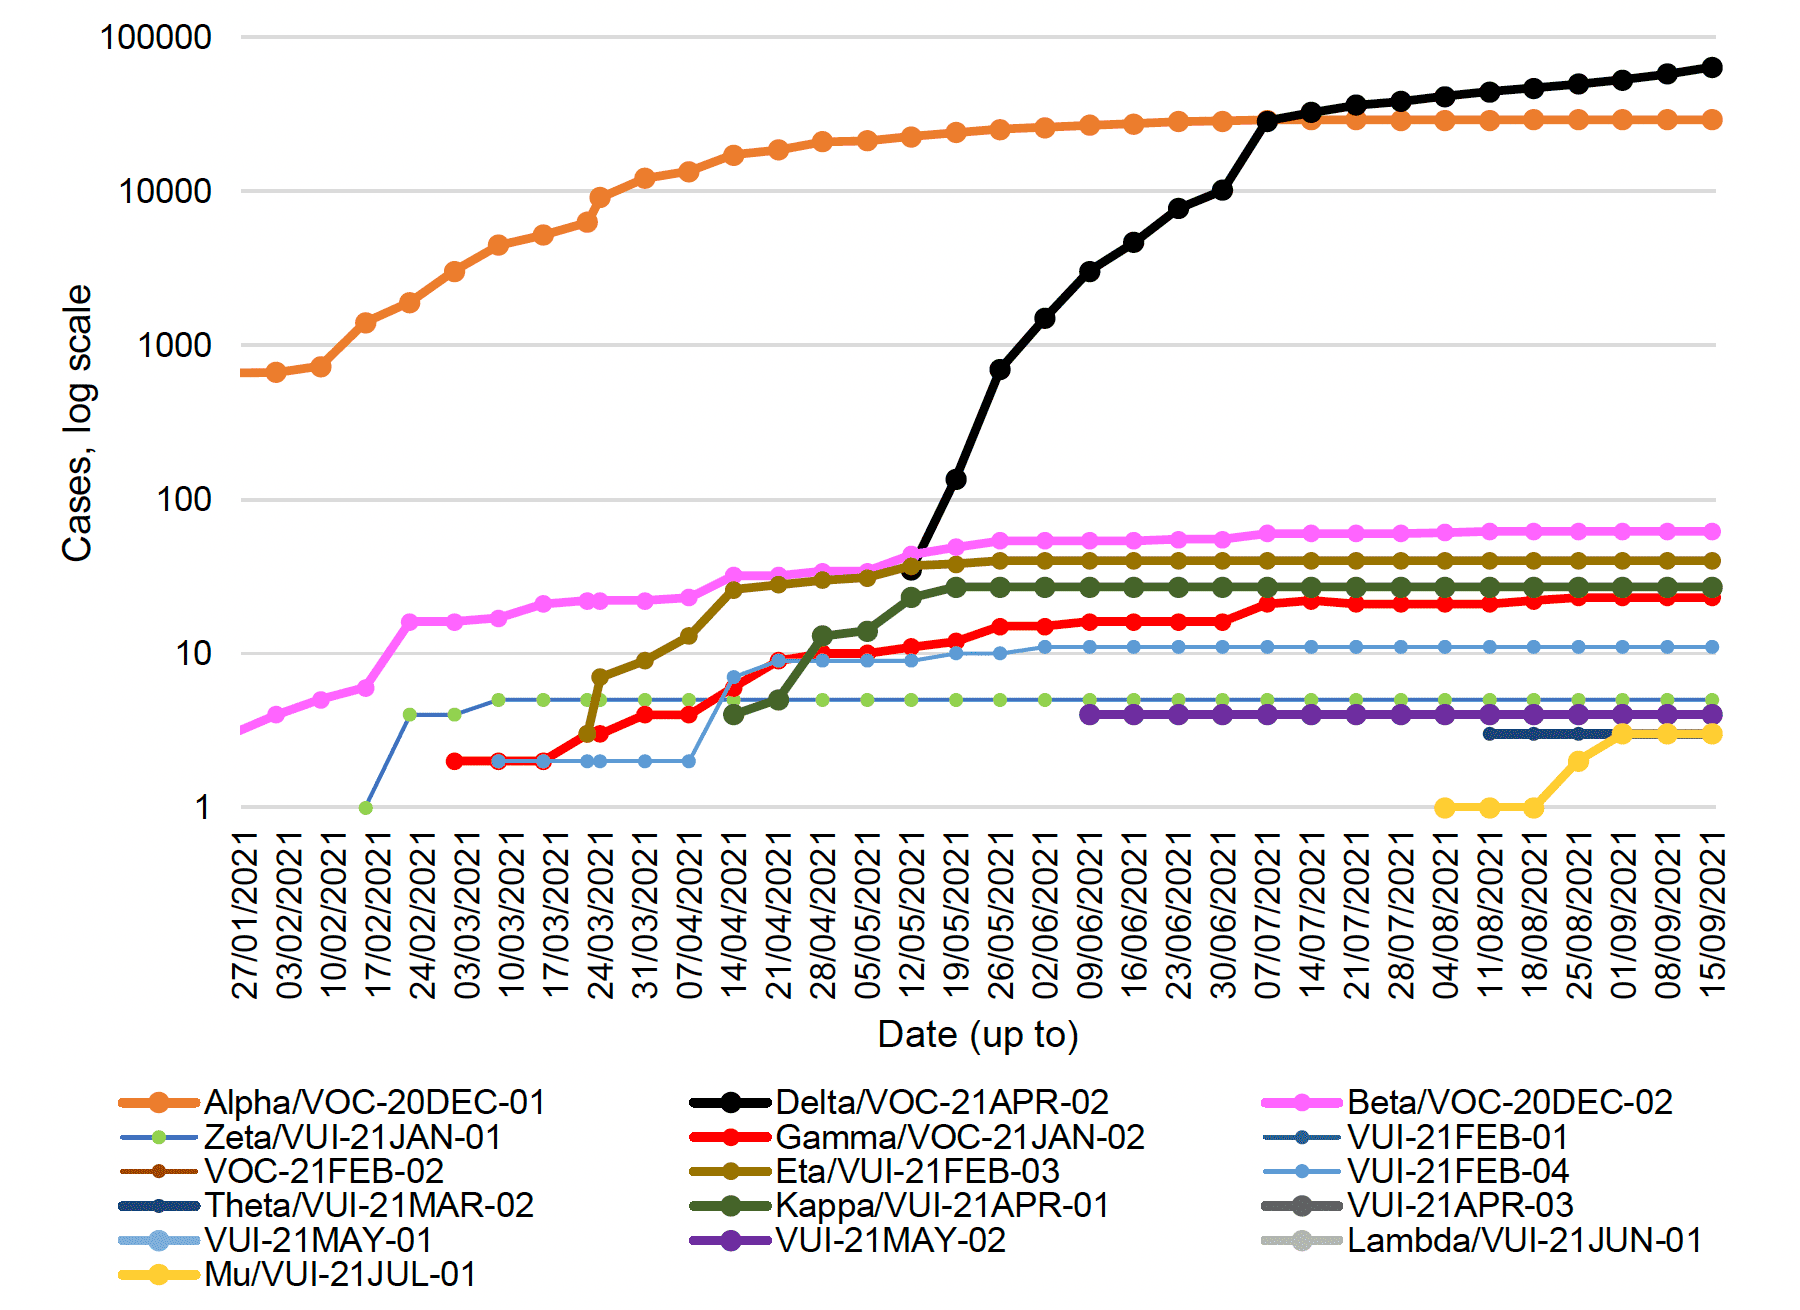 This line graph shows the number of cases of the variants of concern and variants of interest that have been detected by sequencing in Scotland each week, from 25 January to 15 September 2021.

Beta, also known as VOC-20DEC-02, first detected in South Africa, was increasing steadily since late January from 3 cases to 60 cases on the 7 July, and then increased to 62 cases by 11 August. Beta has remained at 62 cases since then. Eta, or VUI-21FEB-03, first identified in Nigeria, rapidly increased since mid-March and reached 40 cases at the end of May. Eta has remained stable over the last 16 weeks. Gamma increased to 23 cases in the week to 25 August but has not increased any further over the last weeks. There are also 27 cases of Kappa, or VUI-21APR-01, first identified in India, no change since mid-May. The first case of VUI-21Jul-01 emerged in the week to 4 August with three new case identified in the week to 1 September, however no change over the last 2 weeks. Delta, also known as VOC-21APR-02, first identified in India, has seen a rapid increase in the past 18 weeks to 64,169 cases, an increase of 6,147 cases since the week before.
